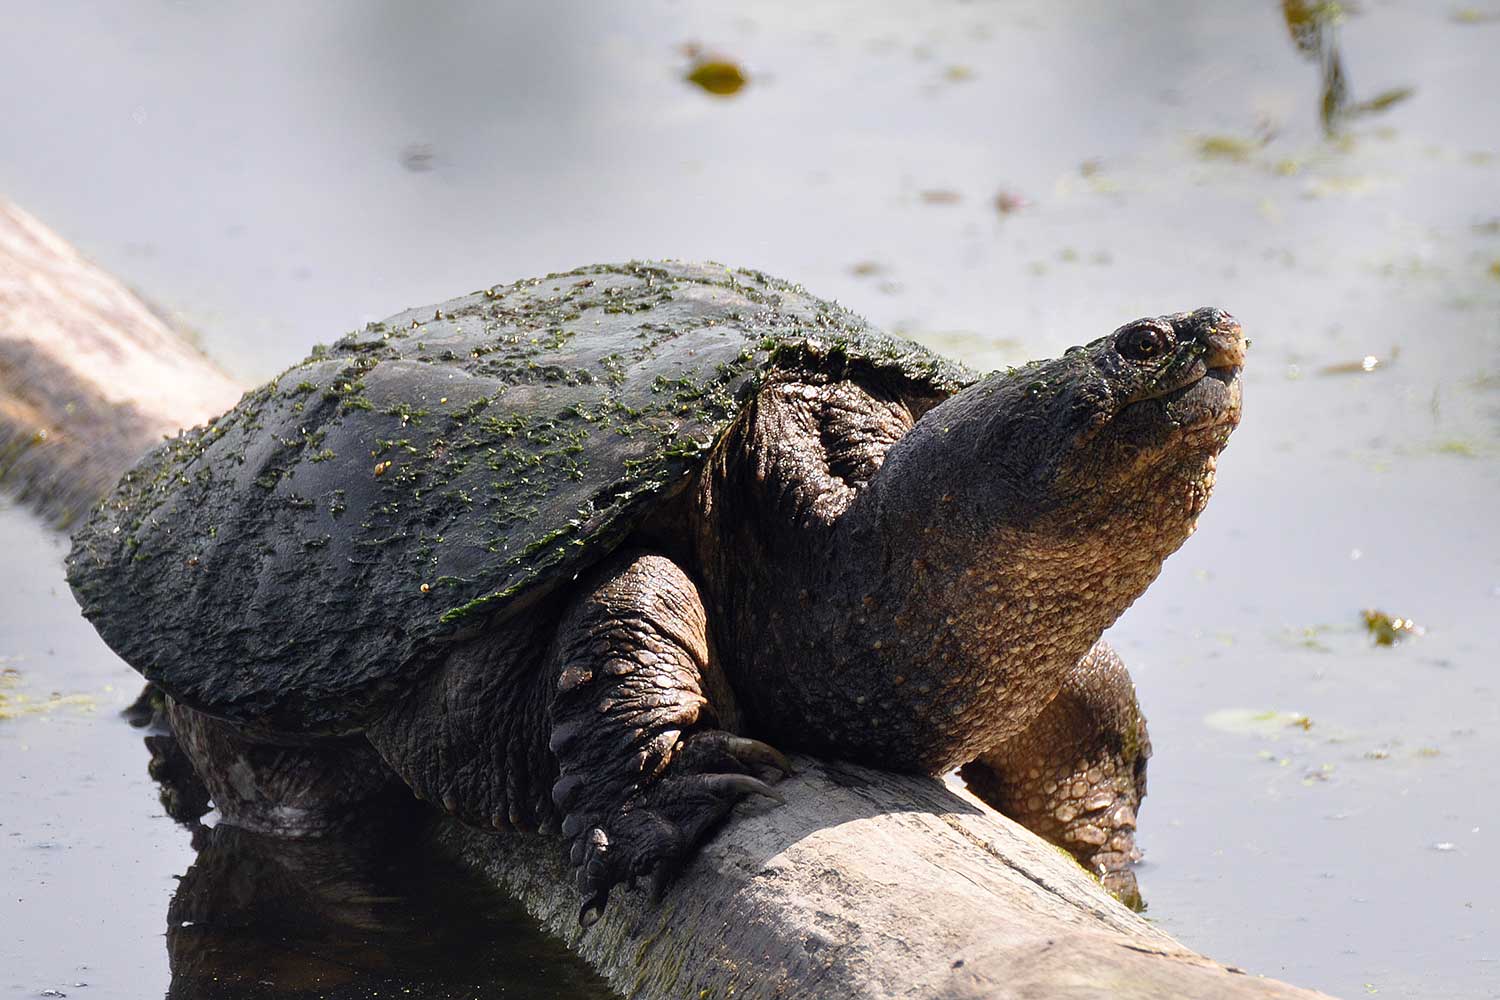 A snapping turtle basking on a log in the water.